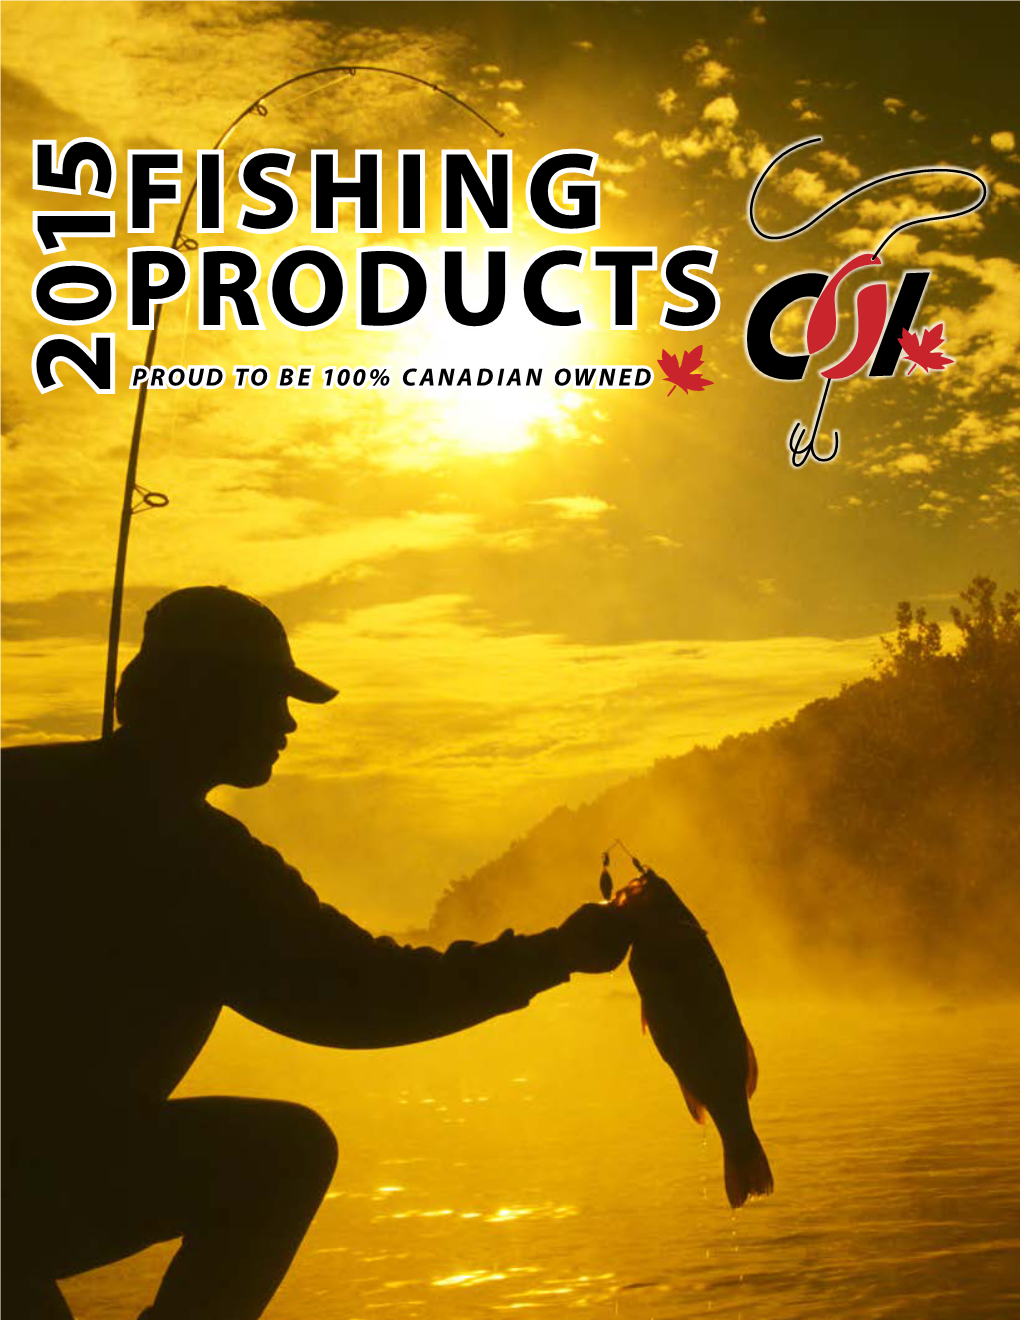 Fishing Products Proud to Be 100% Canadian Owned 2015